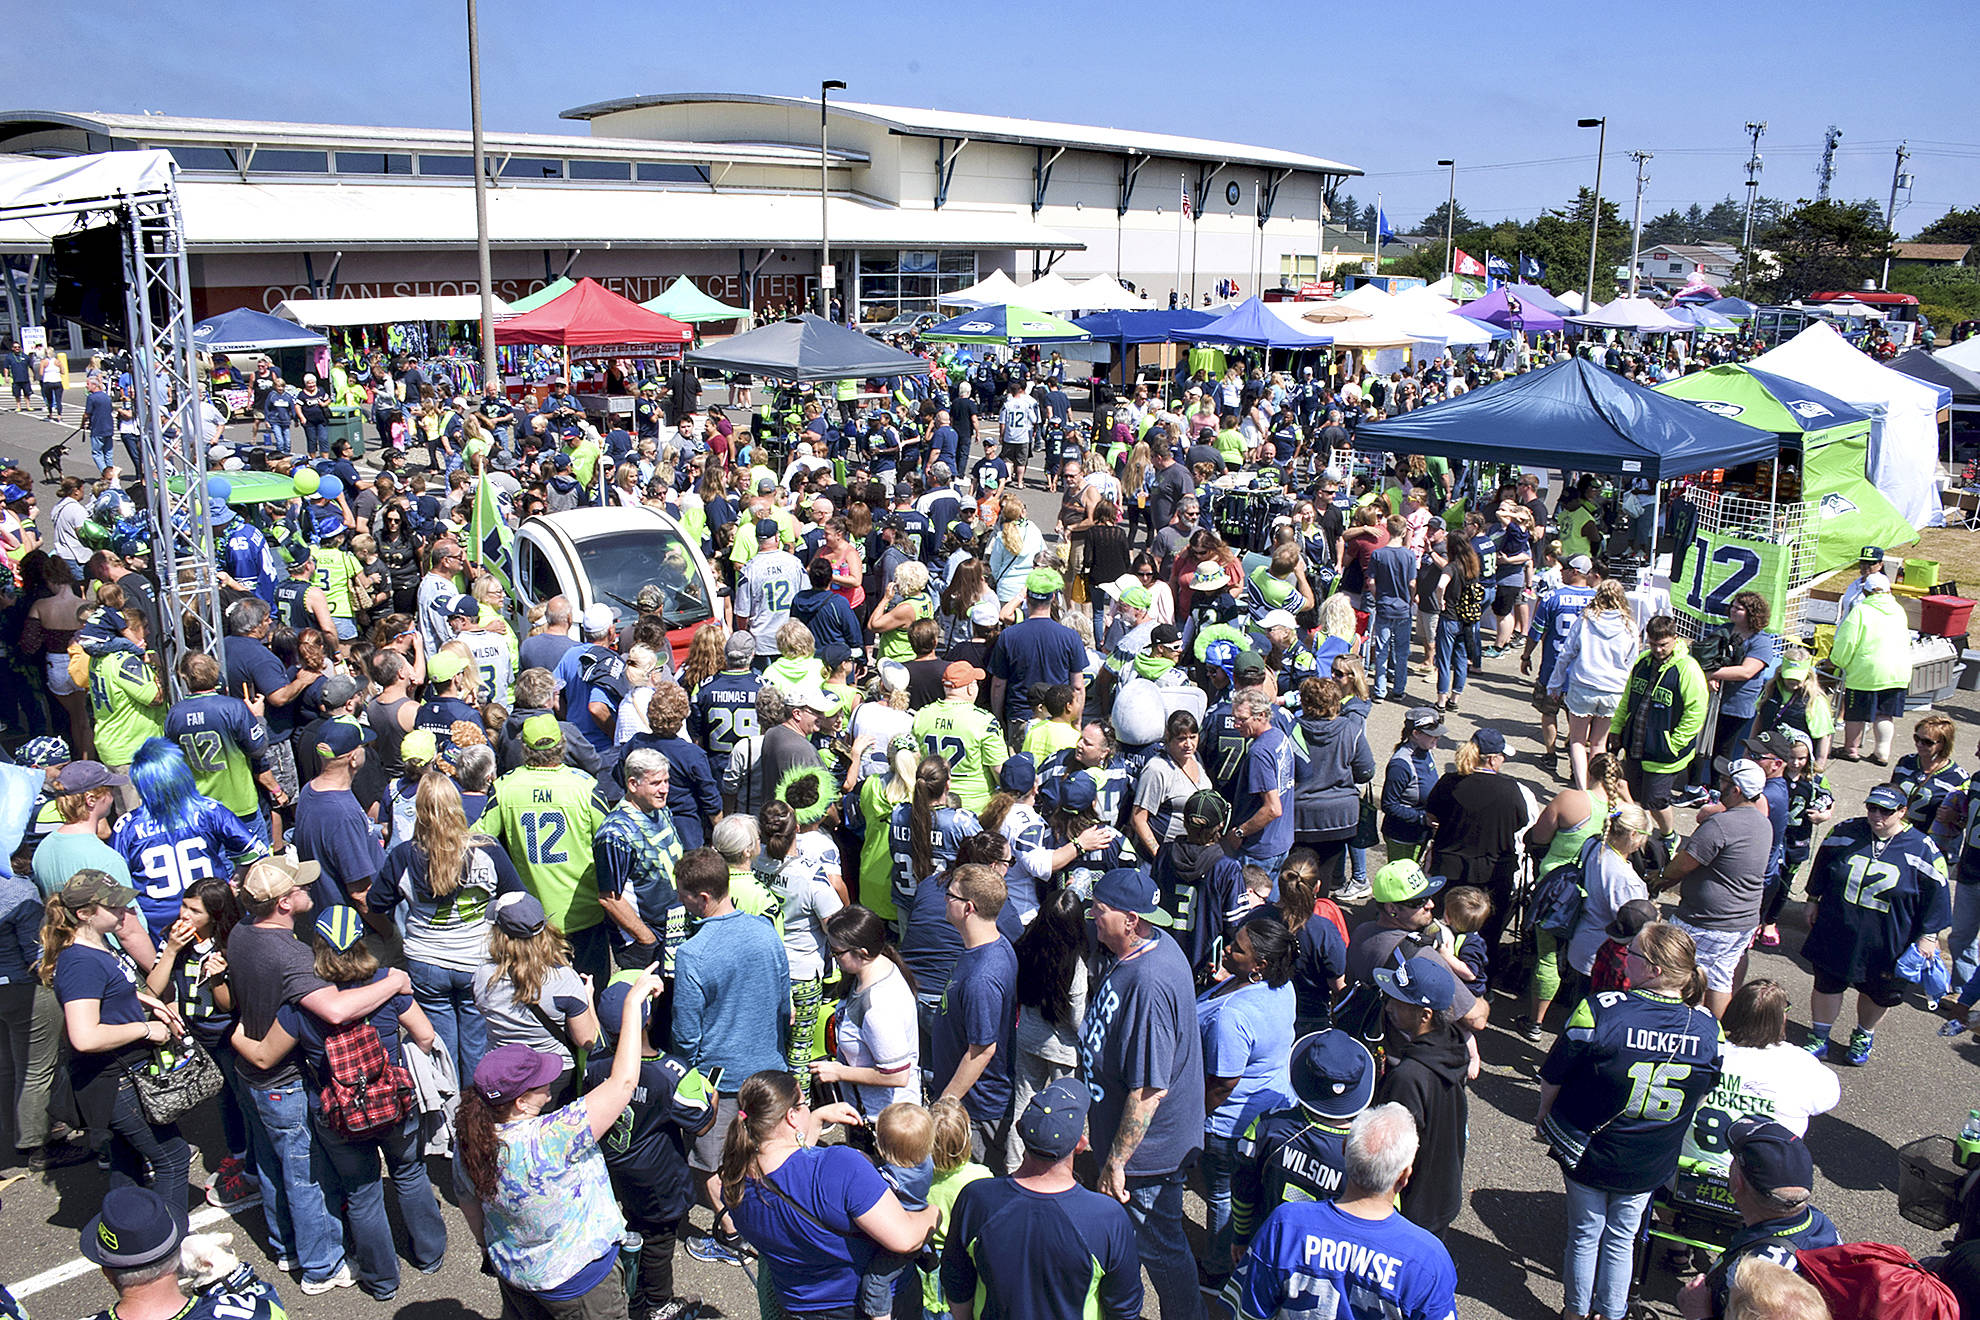 Photo by Scott D. Johnston                                The last Seahawks Fan Fest in Ocean Shores, in 2018, saw crowds estimated in excess of 20,000 pack the Ocean Shores Convention Center, where a new “Hawk Daze” fan event has just been announced for Aug. 14-16.